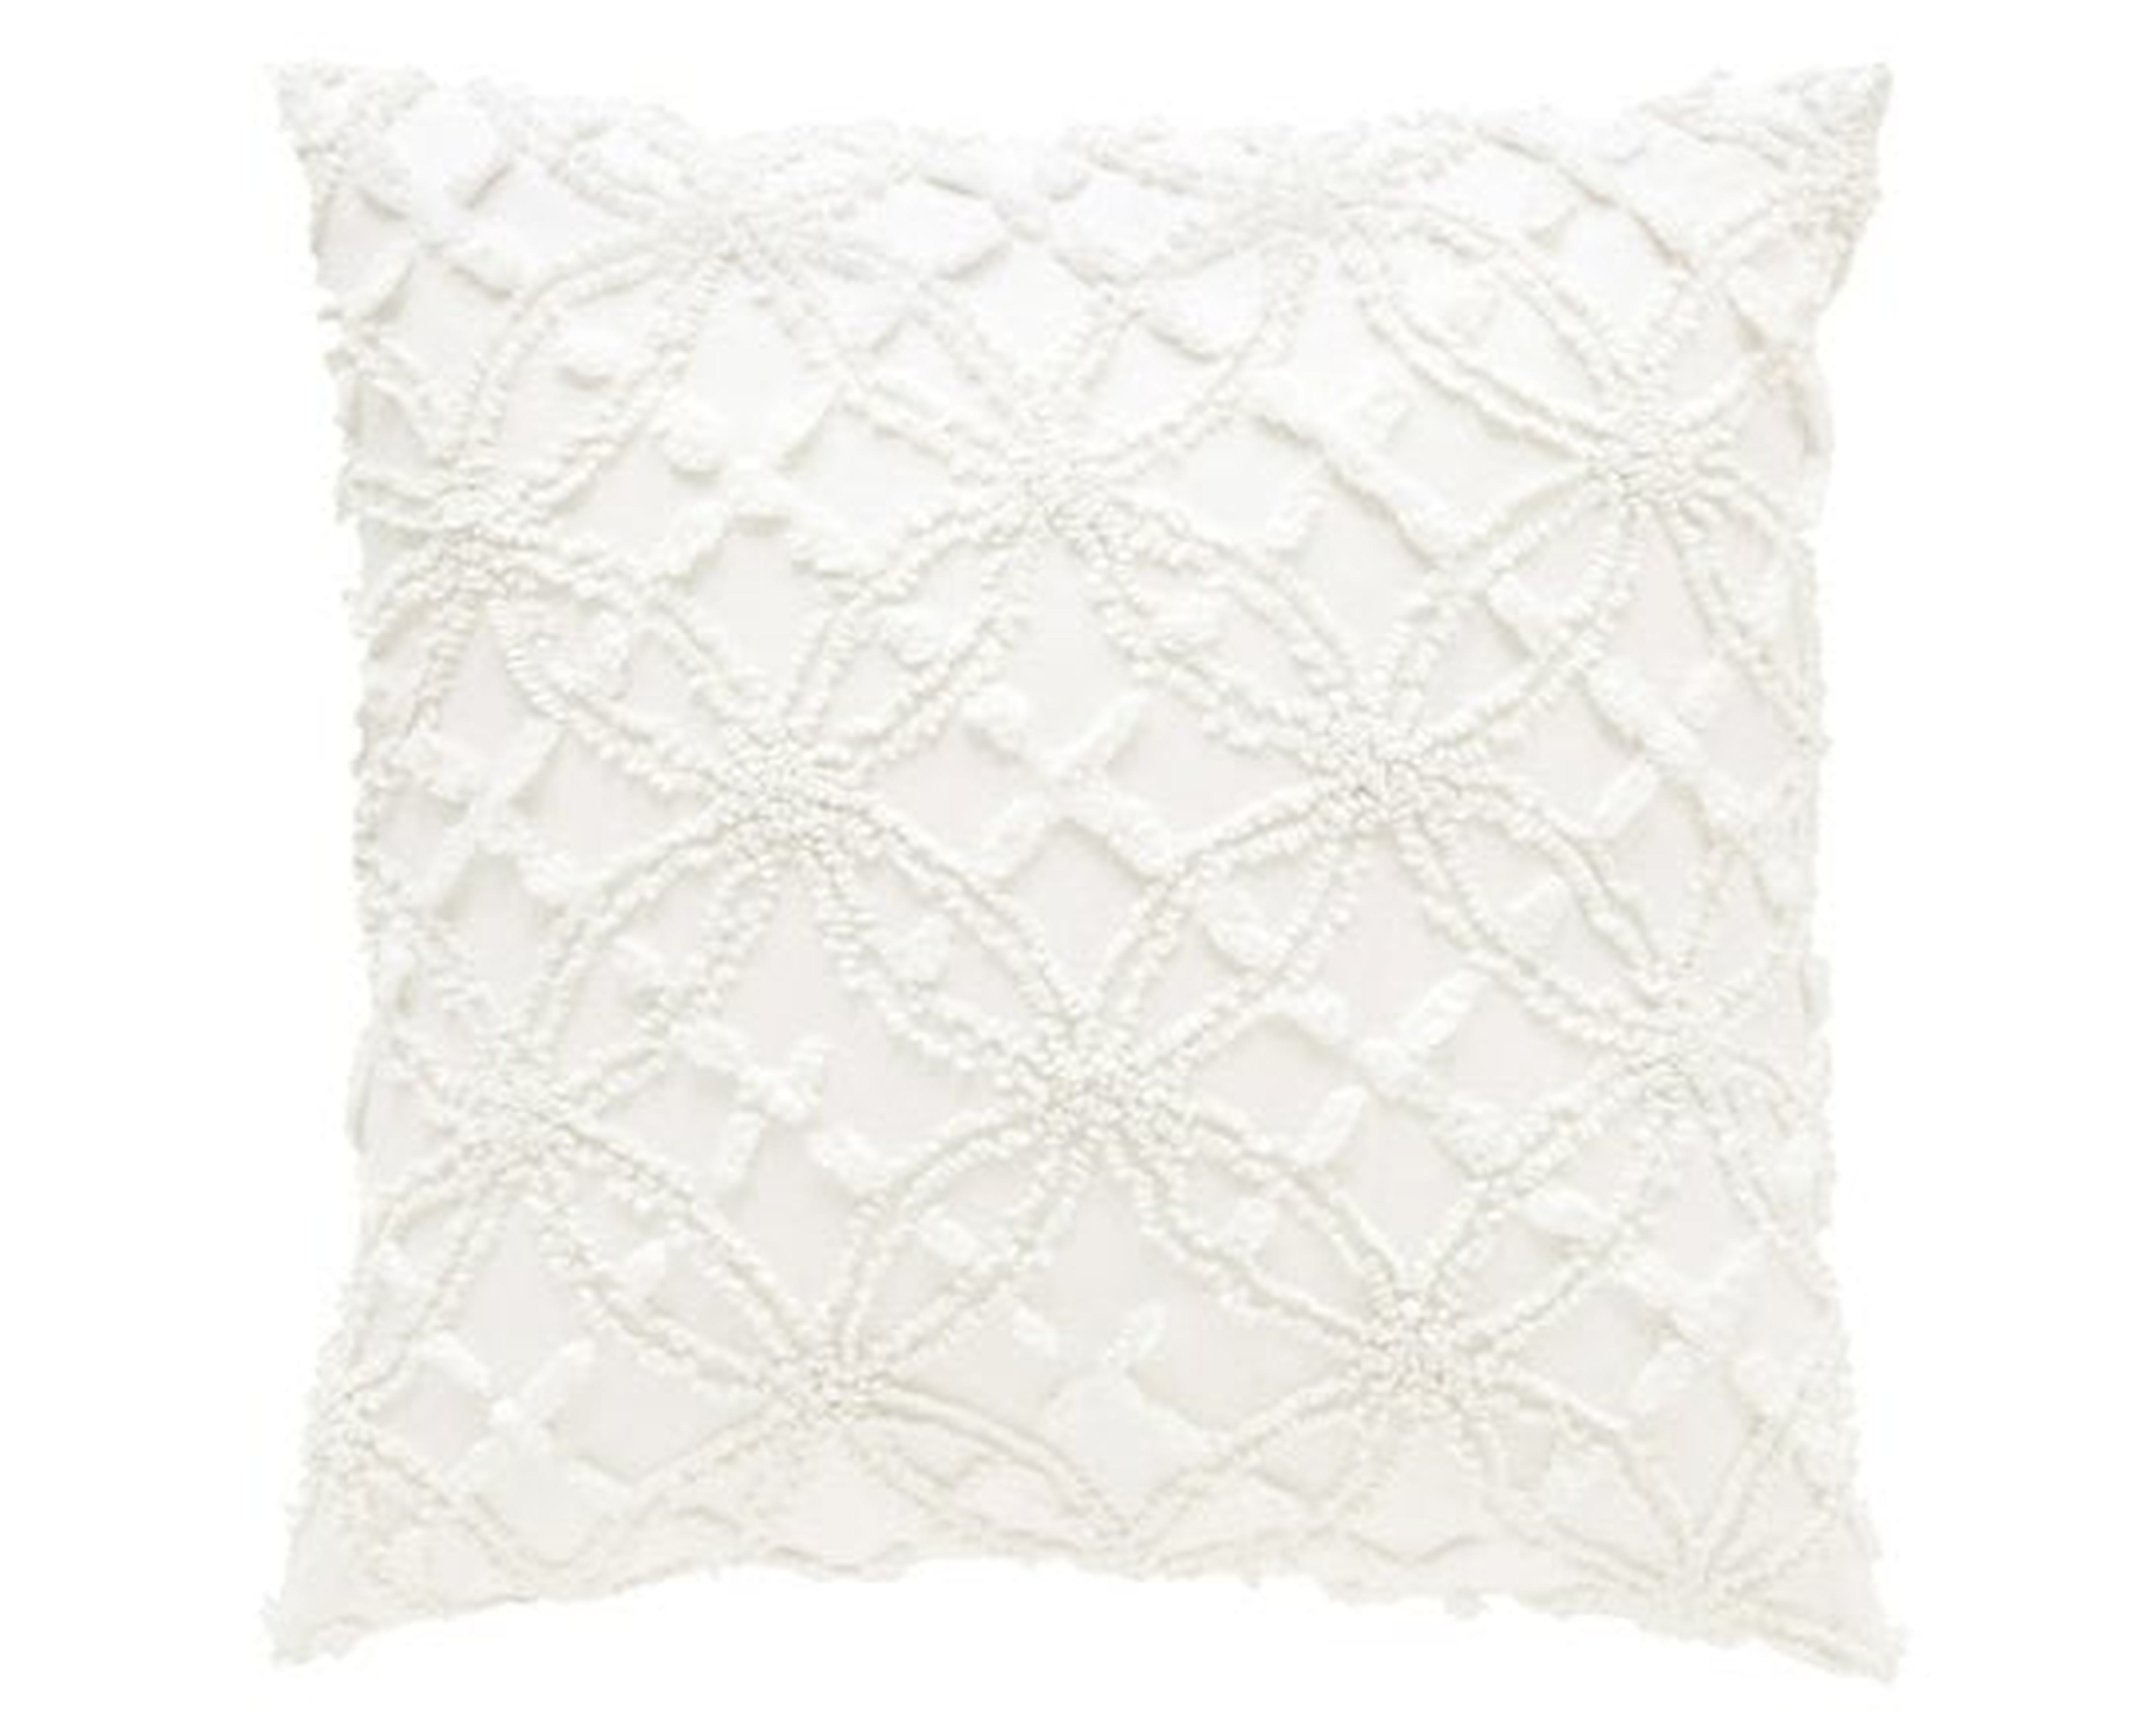 Candlewick Pillow, 18" x 18", Feather Down Insert, Dove White - Dash and Albert